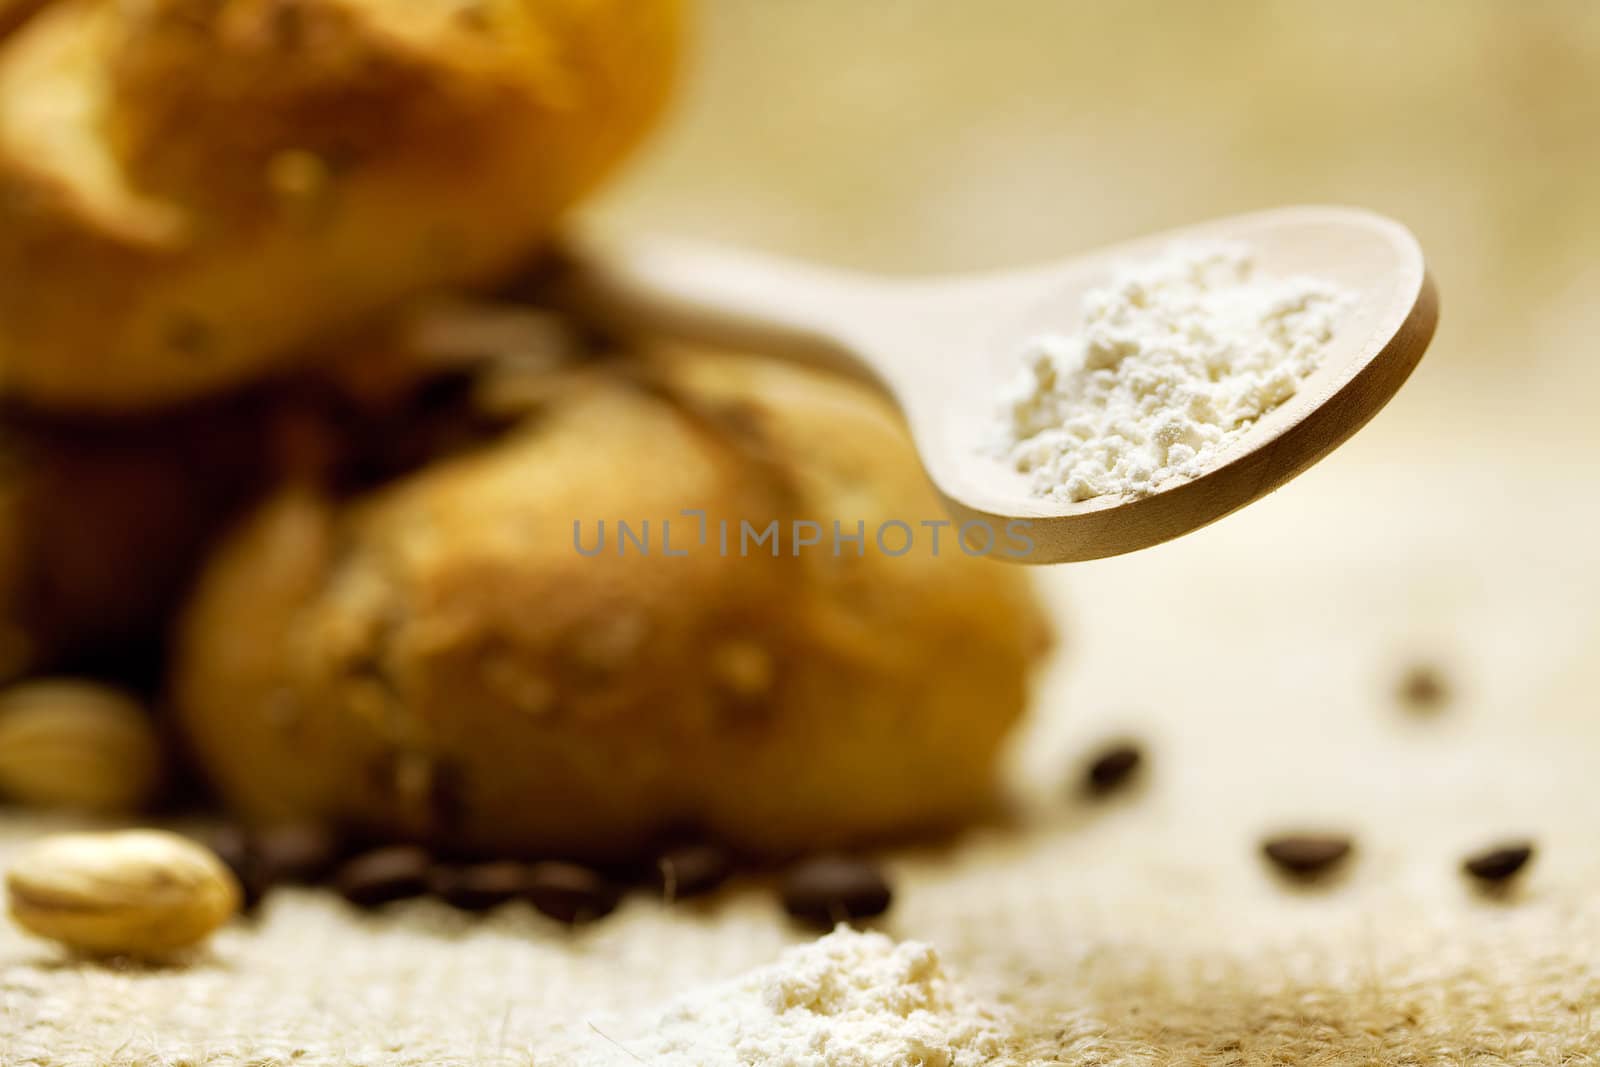 bread and flour in a spoon on a wicker mat